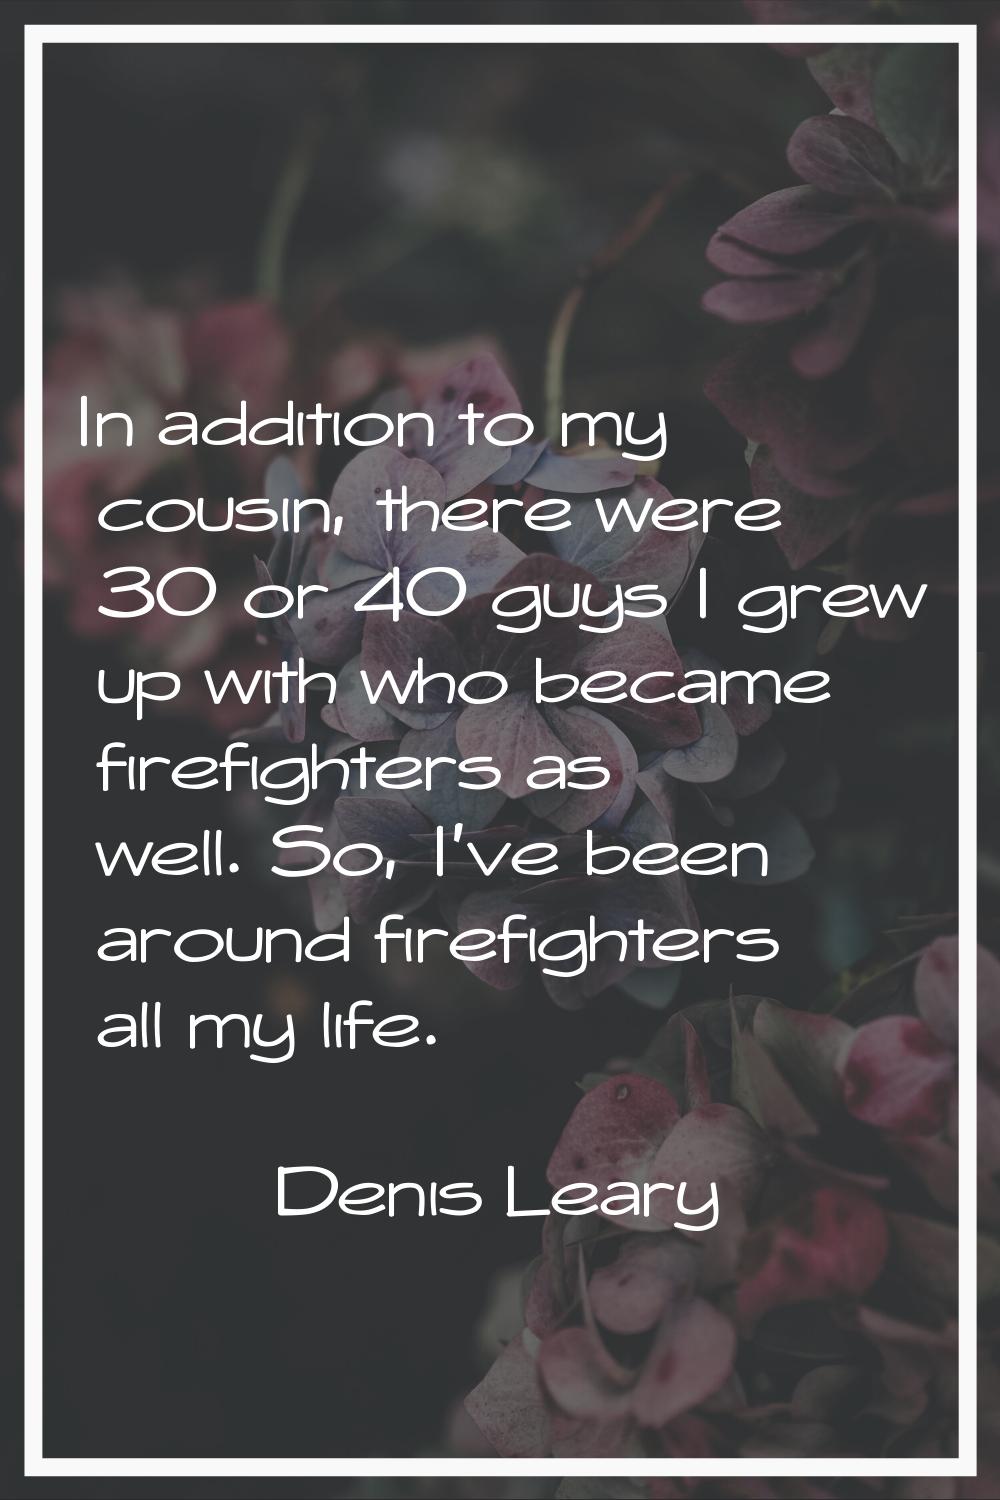 In addition to my cousin, there were 30 or 40 guys I grew up with who became firefighters as well. 